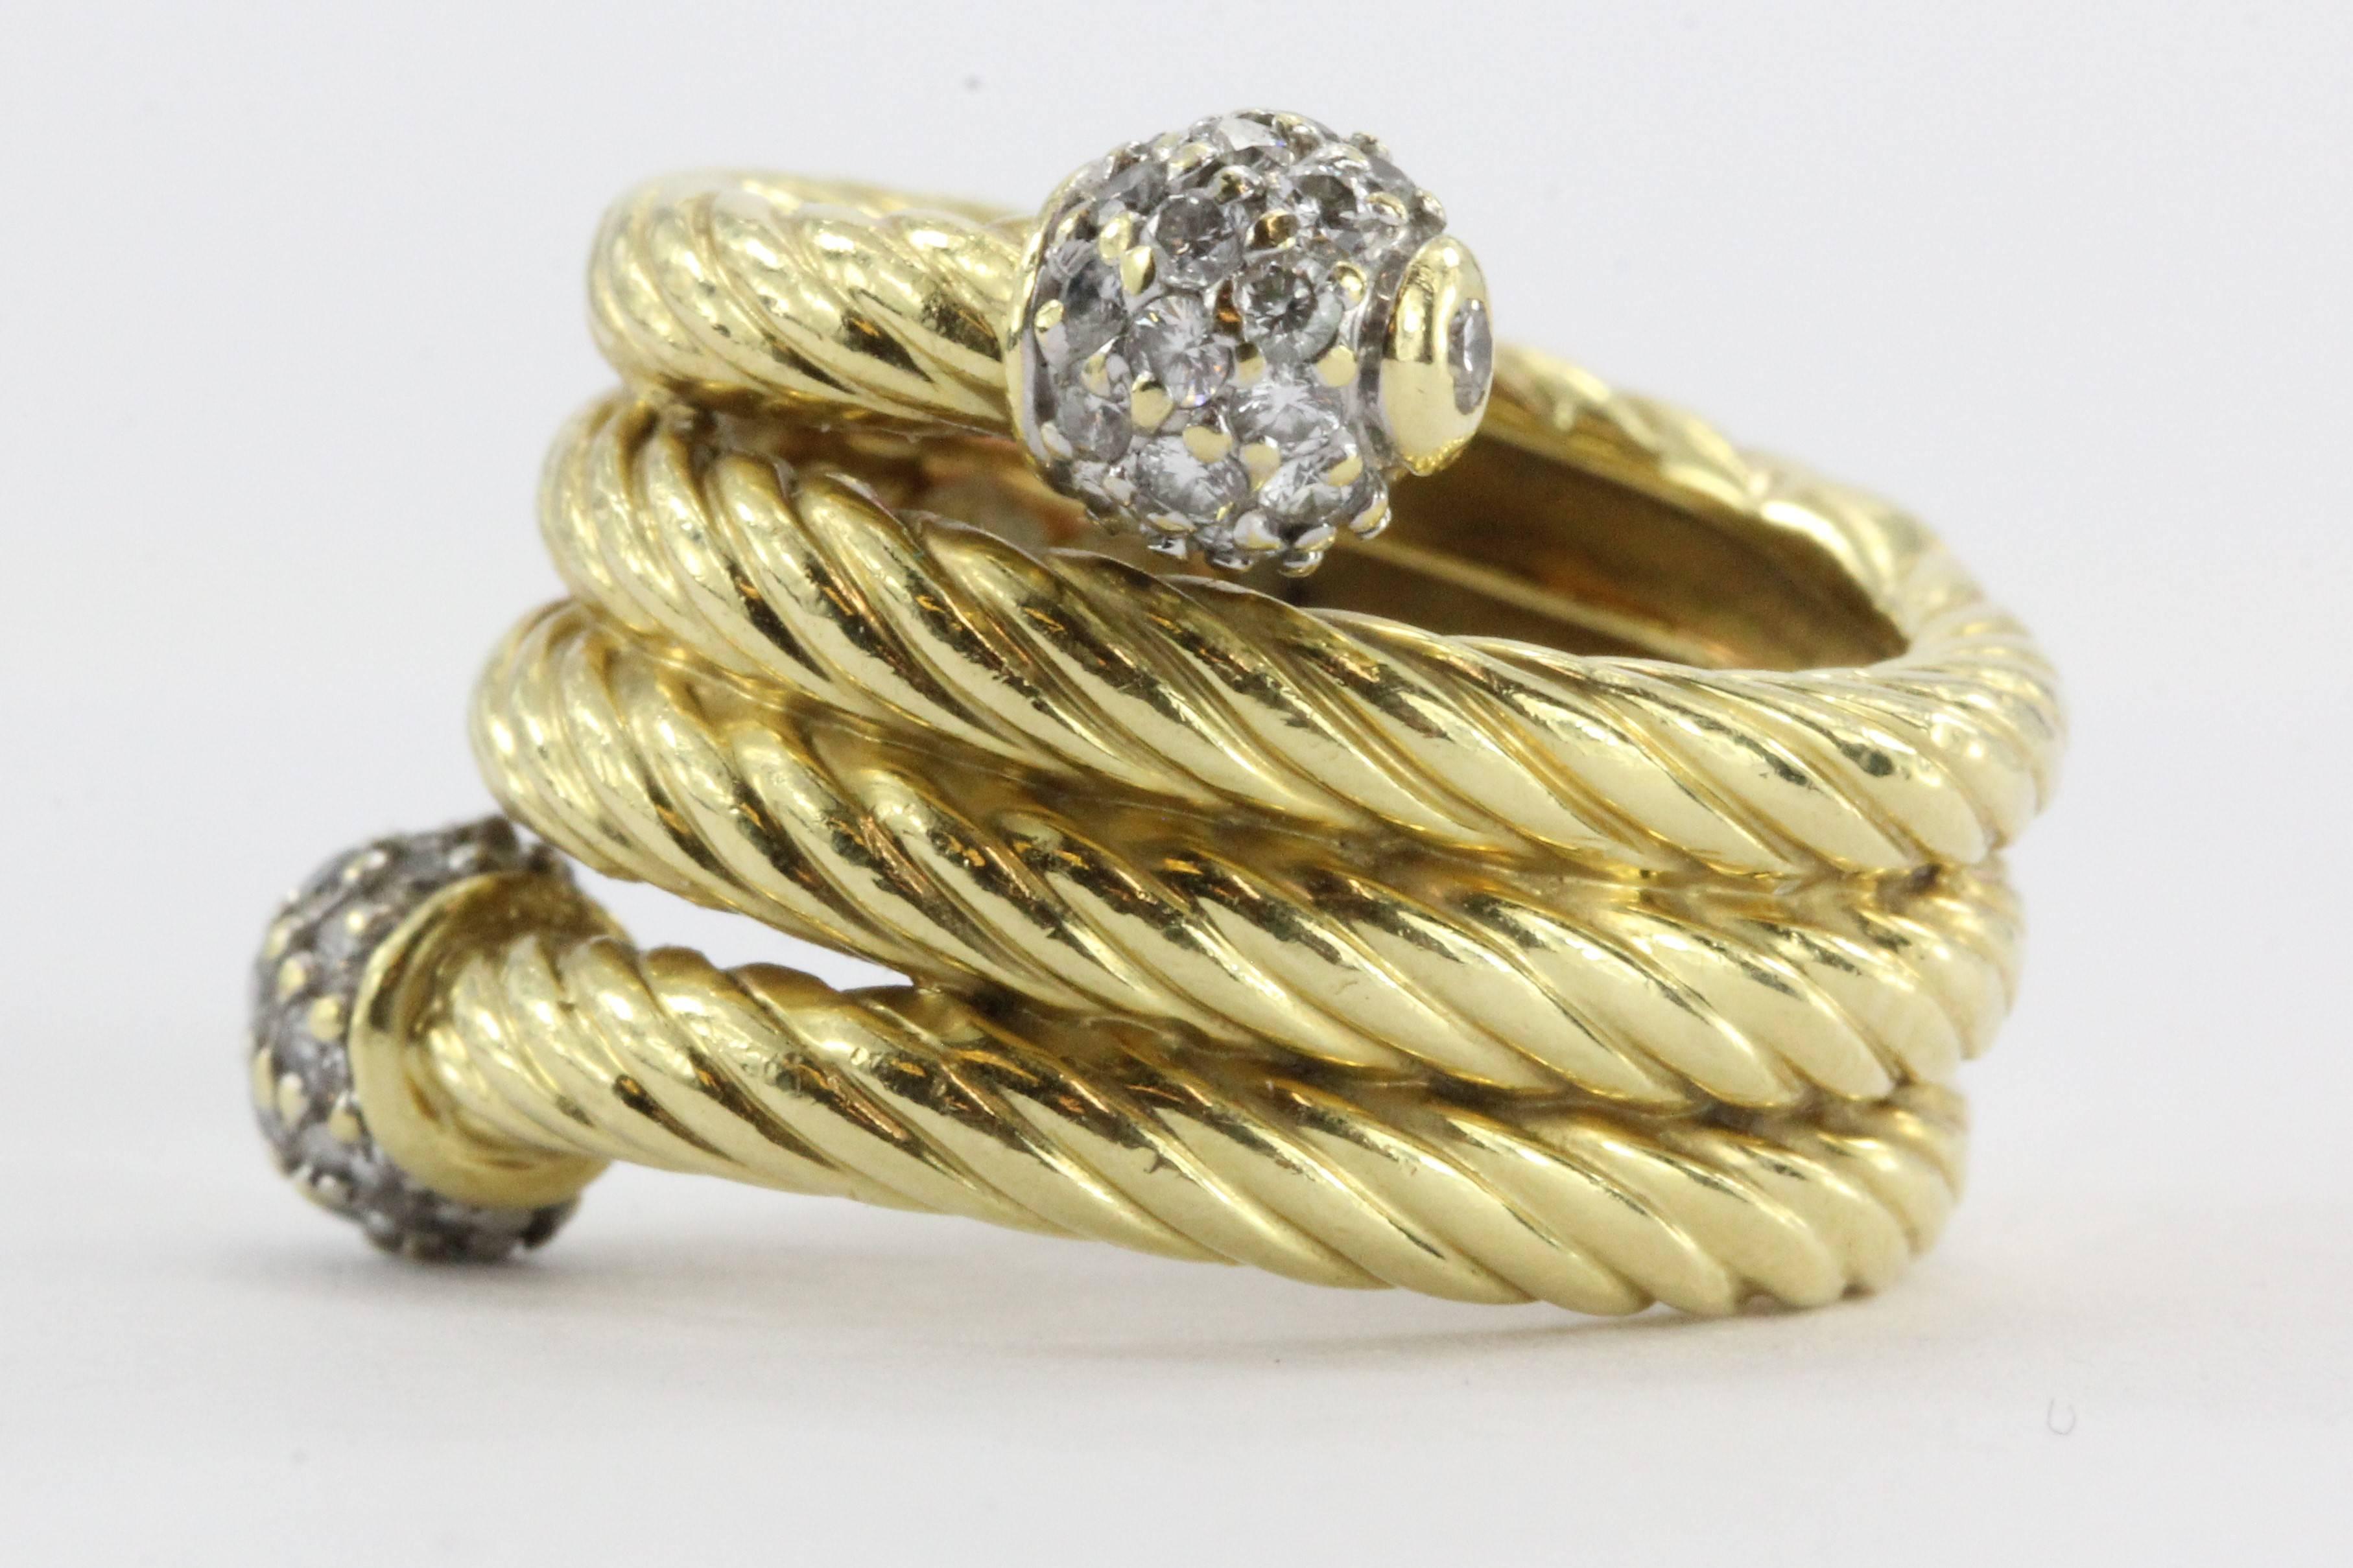 Estate David Yurman 
18K Yellow Gold Spiral Serpentine Diamond Ring 
Hallmarked D.Y. 750 
Diamonds 0.40 ctw Clarity: VS Color: H
Measurements: Ring size 4.25-4.5
Widest Point 1/4 inch
Weight: 13.0 grams

The ring is in excellent estate